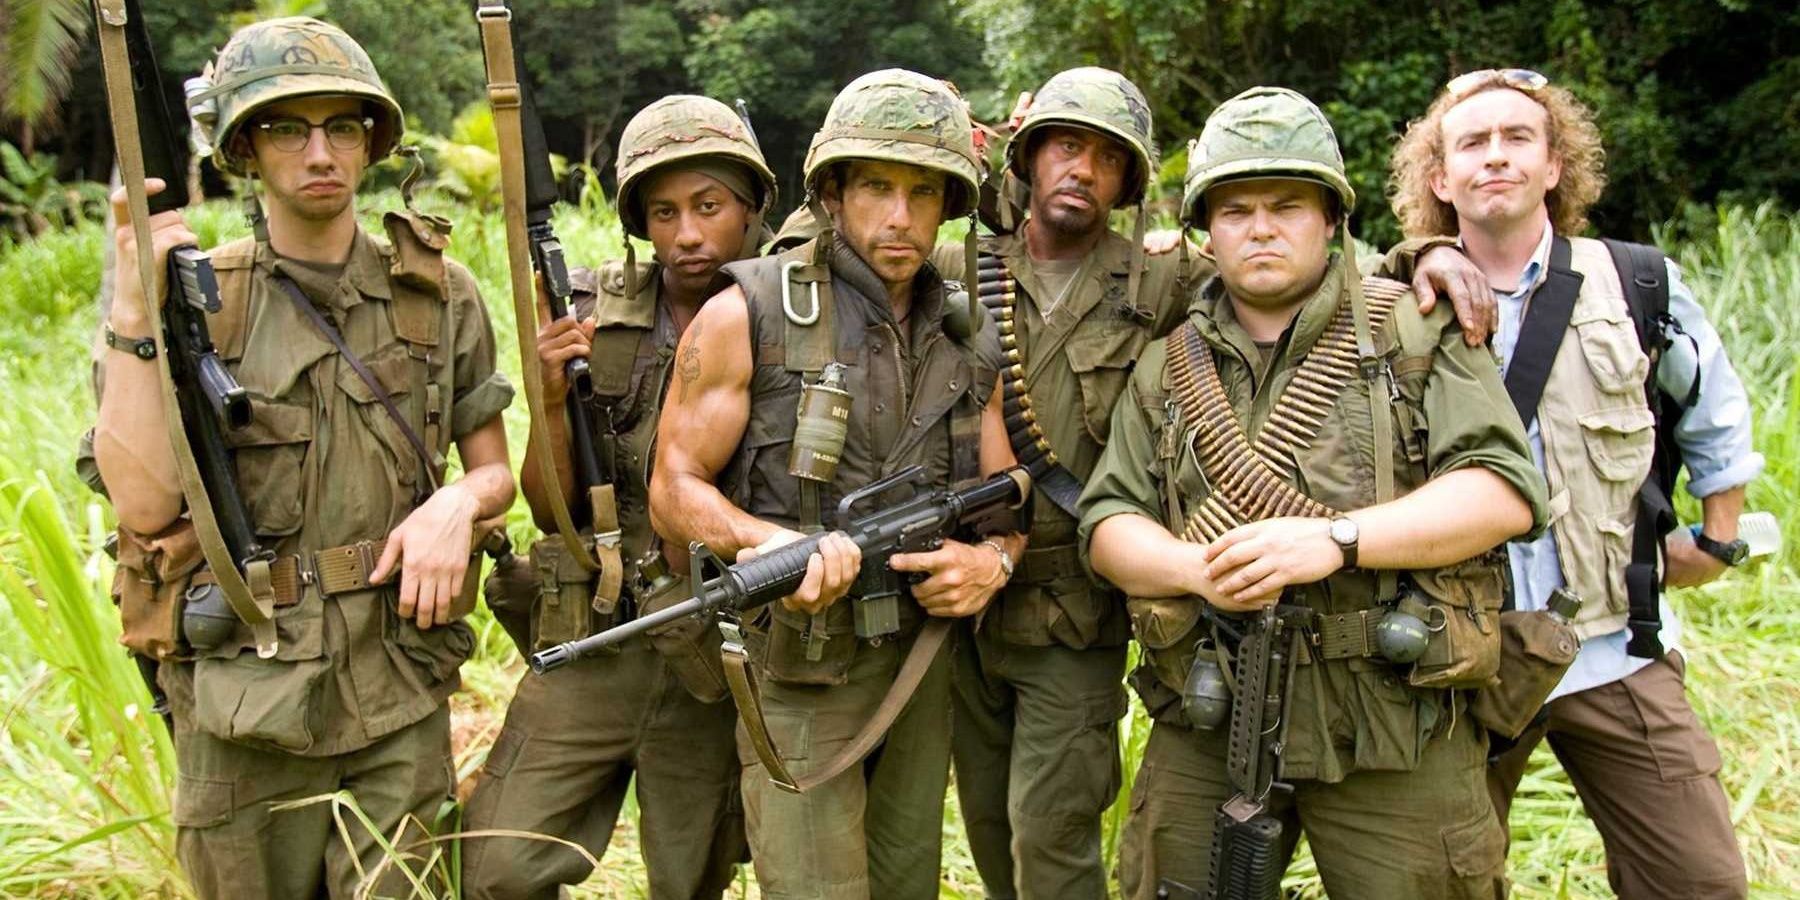 The group of actors posing as military men in Tropic Thunder